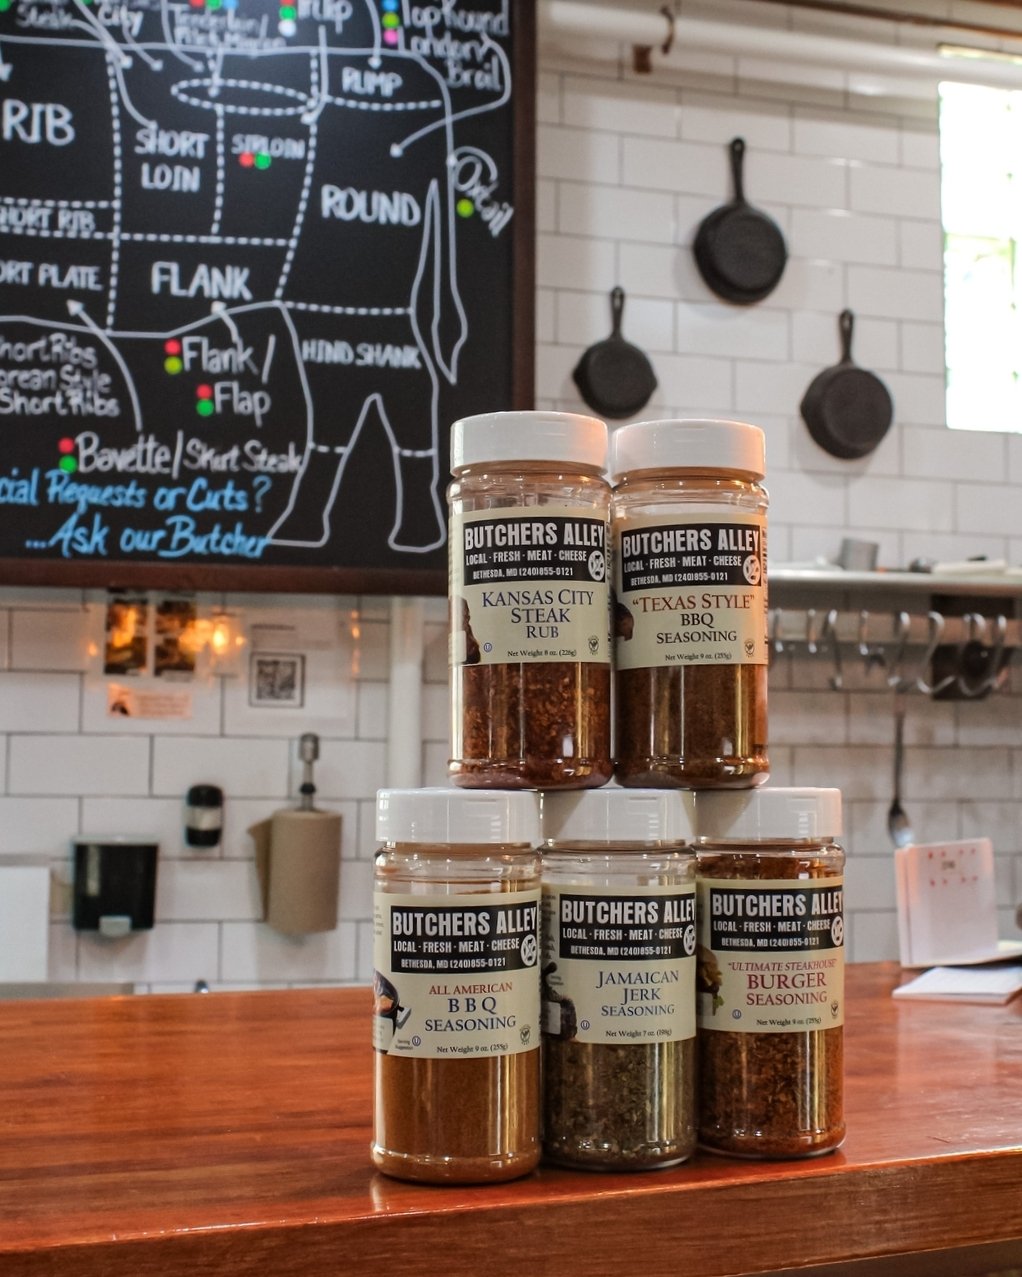 Your grilled favorites are about to get a major upgrade this year with our new house seasonings. We have loads of spice and seasoning options, come check them out. 

#grillmaster #grilling #localbutcher